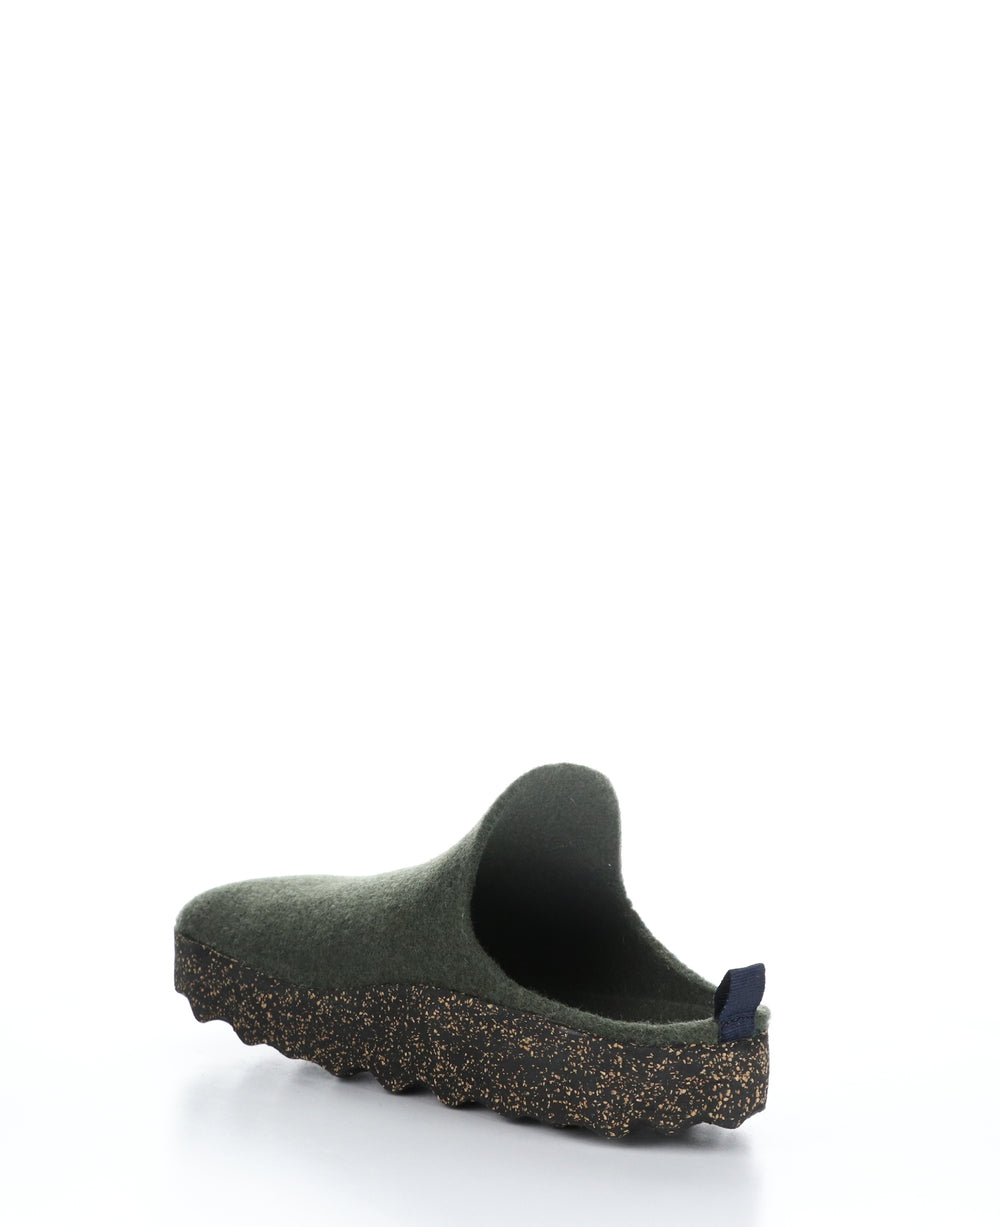 COME061ASPM Military Green Round Toe Shoes|COME061ASPM Chaussures à Bout Rond in Vert